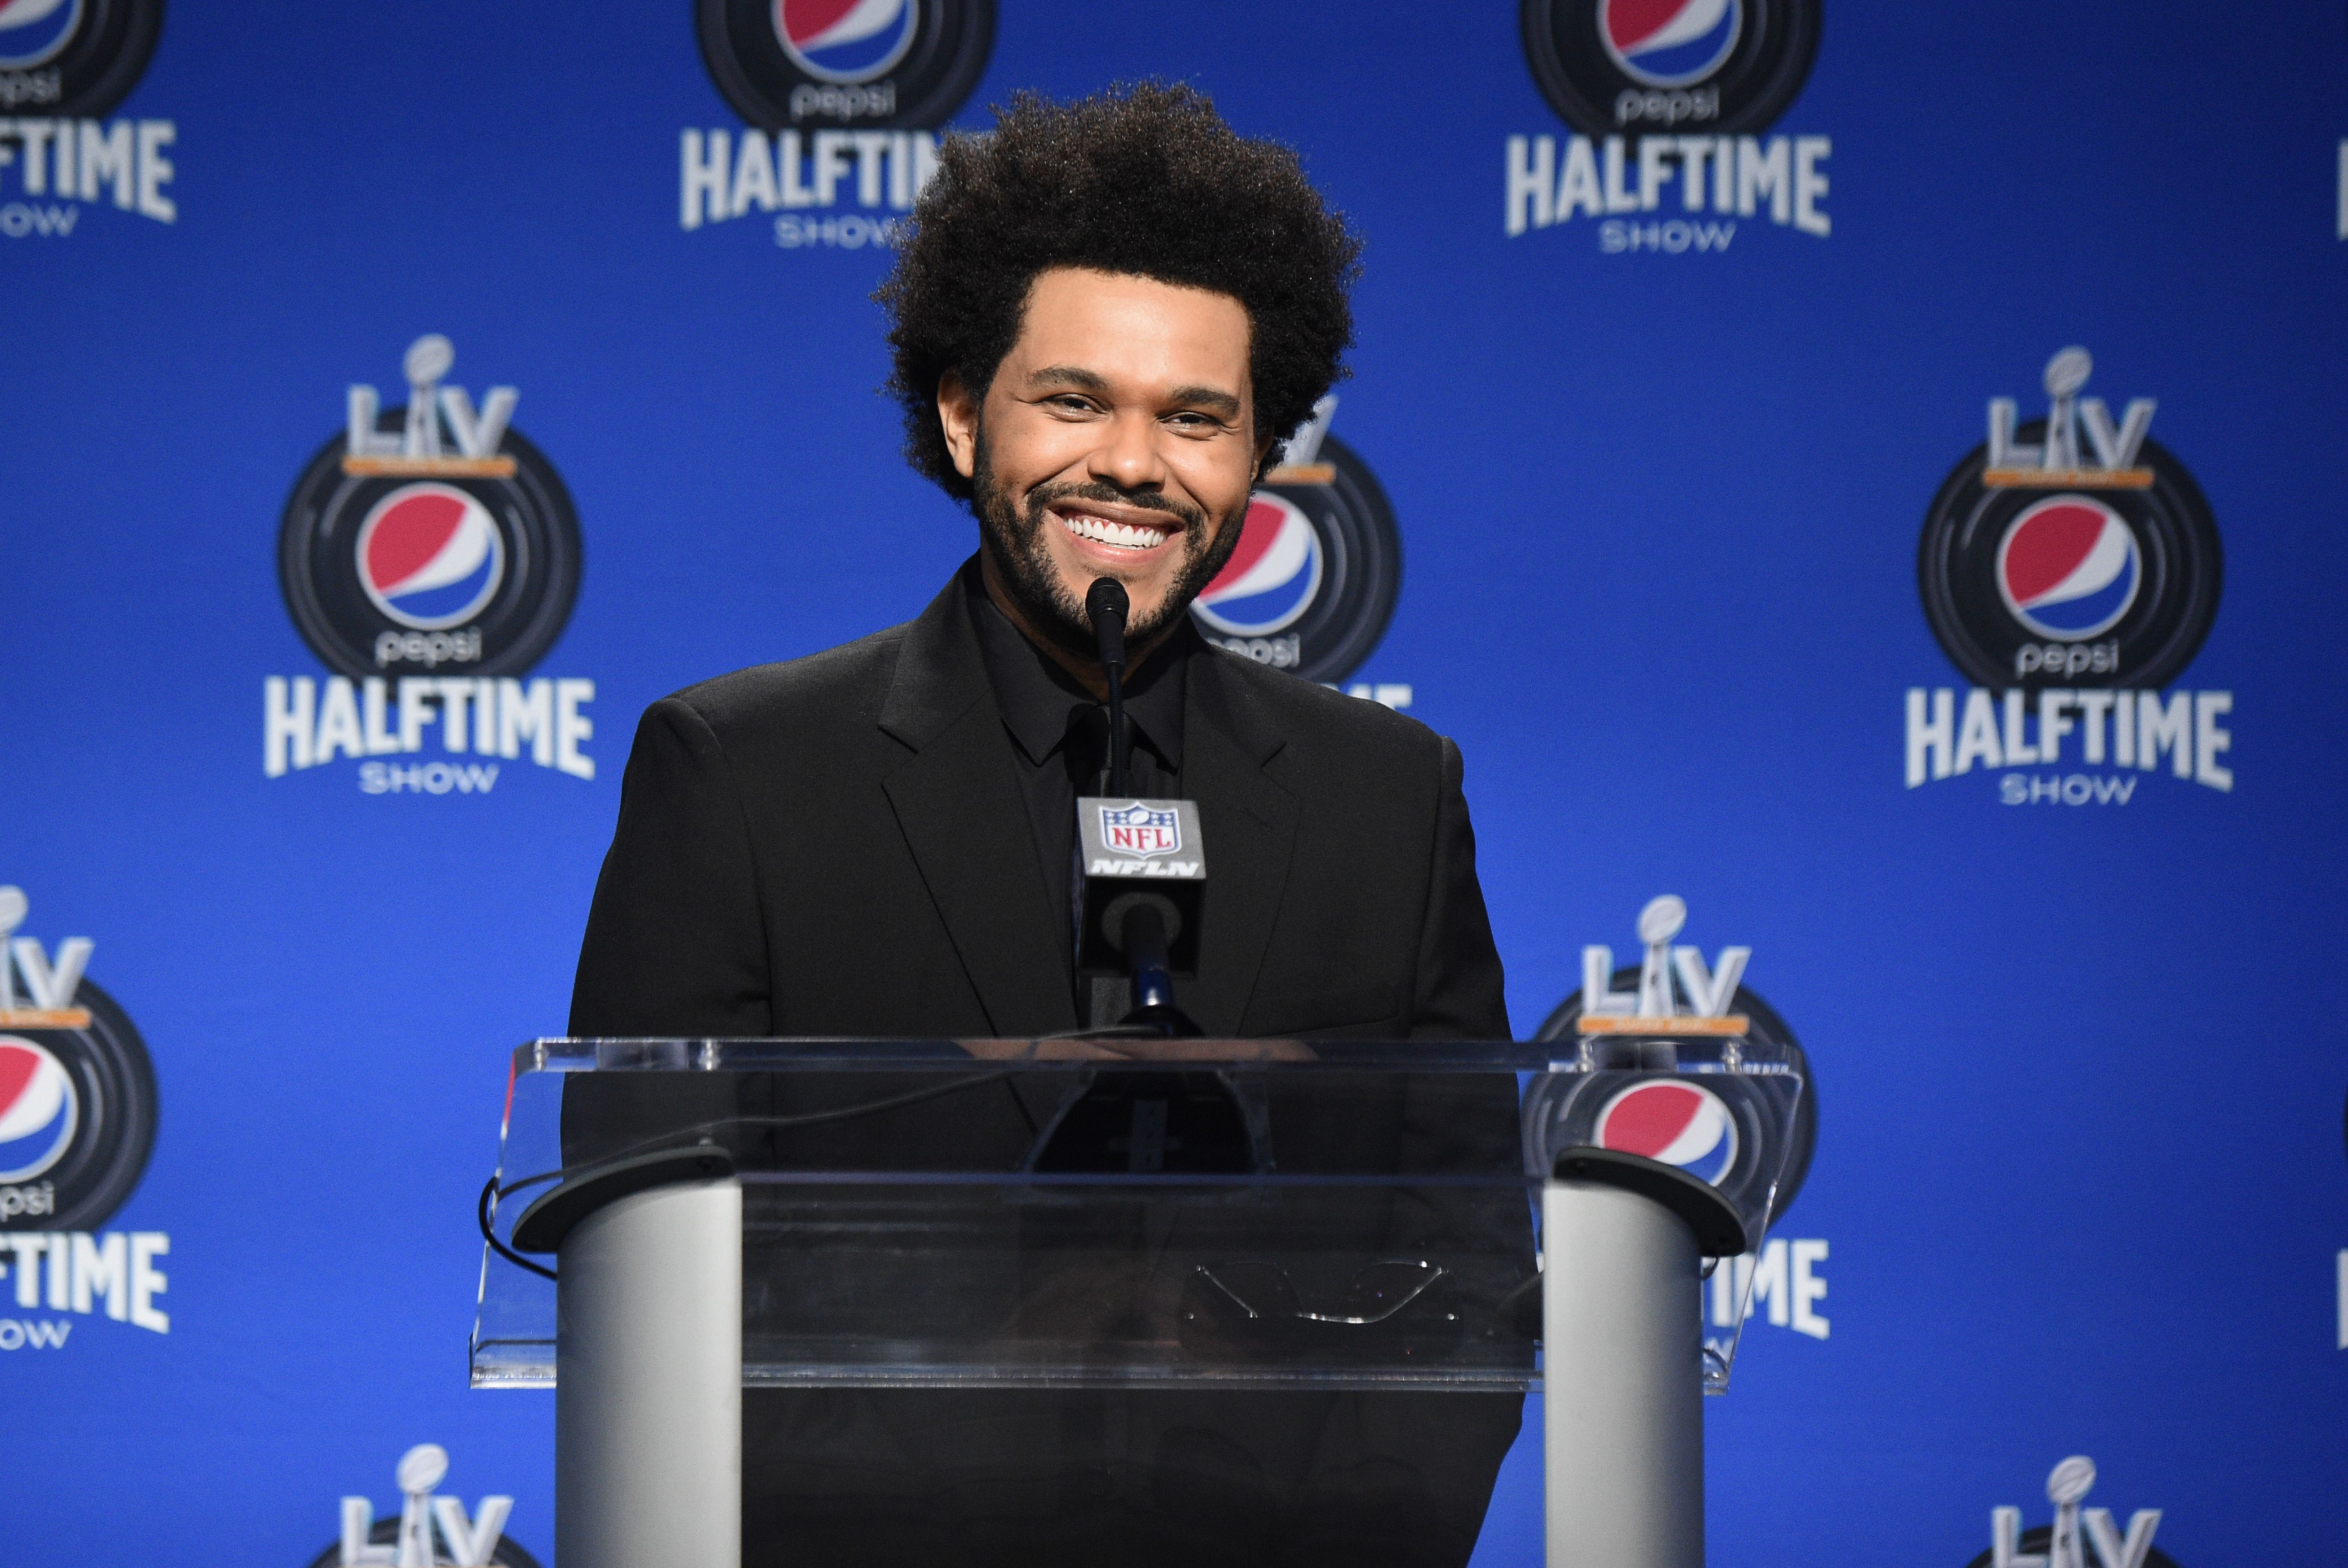 the weeknd spent money on super bowl